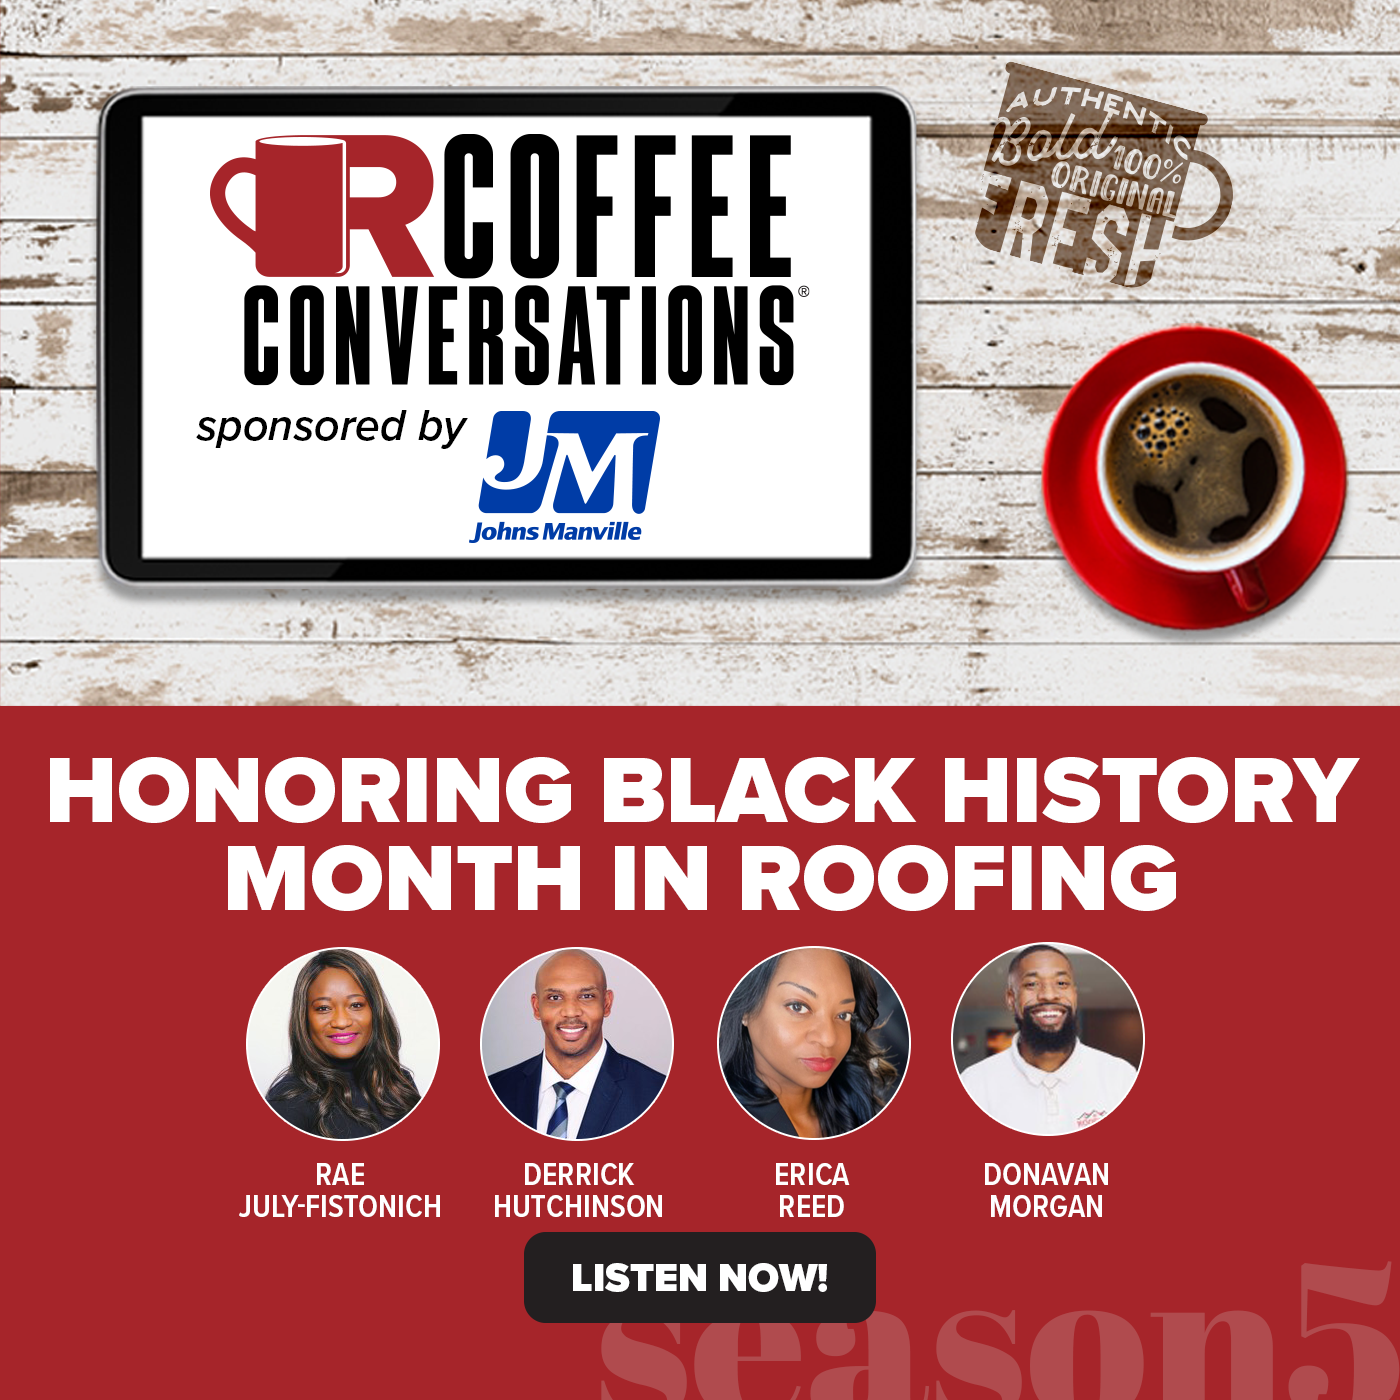 Johns Manville - Coffee Conversations - Honoring Black History Month in Roofing - POD